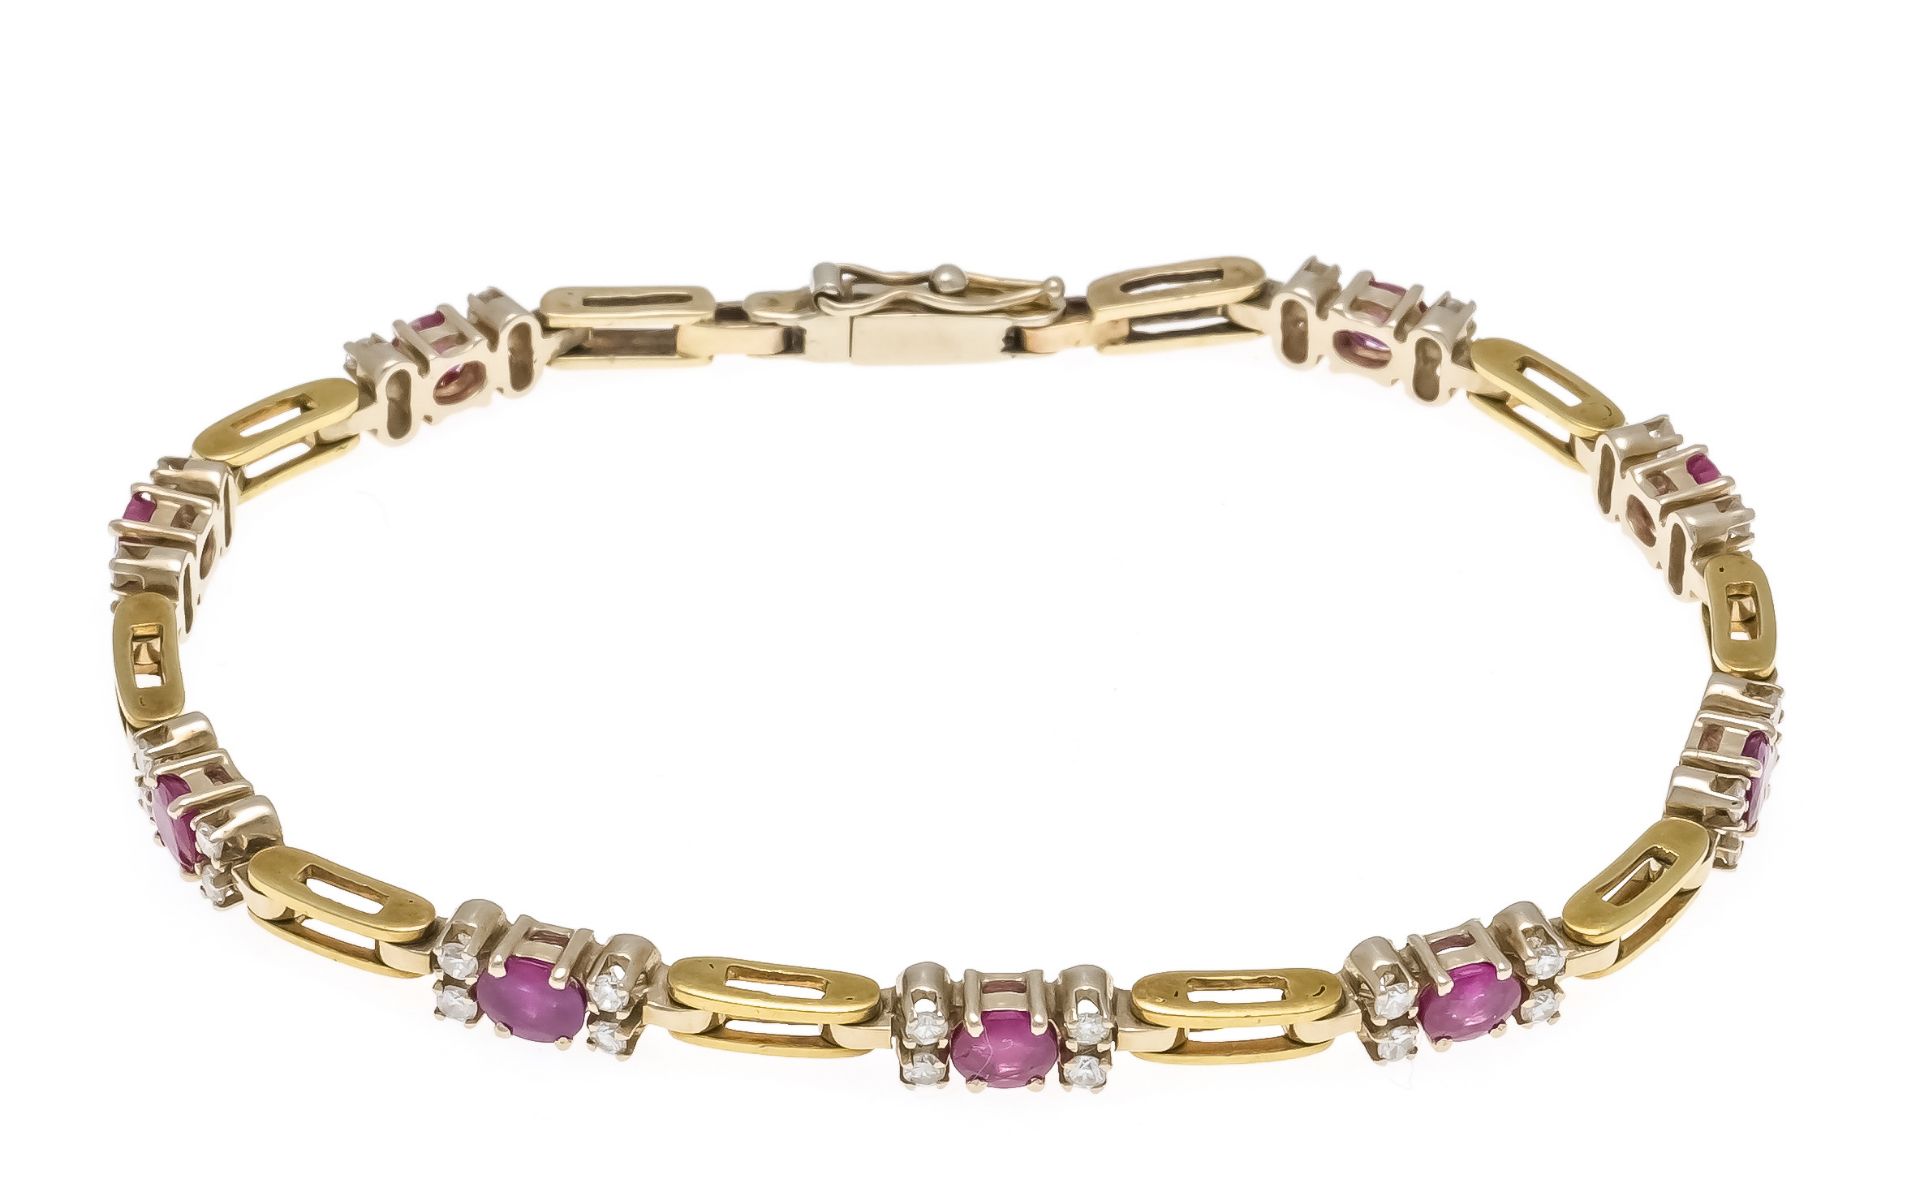 Ruby-brilliant bracelet GG 750/000 with 9 oval faceted rubies 4.8 x 4.0 mm in a slightly bluish red,